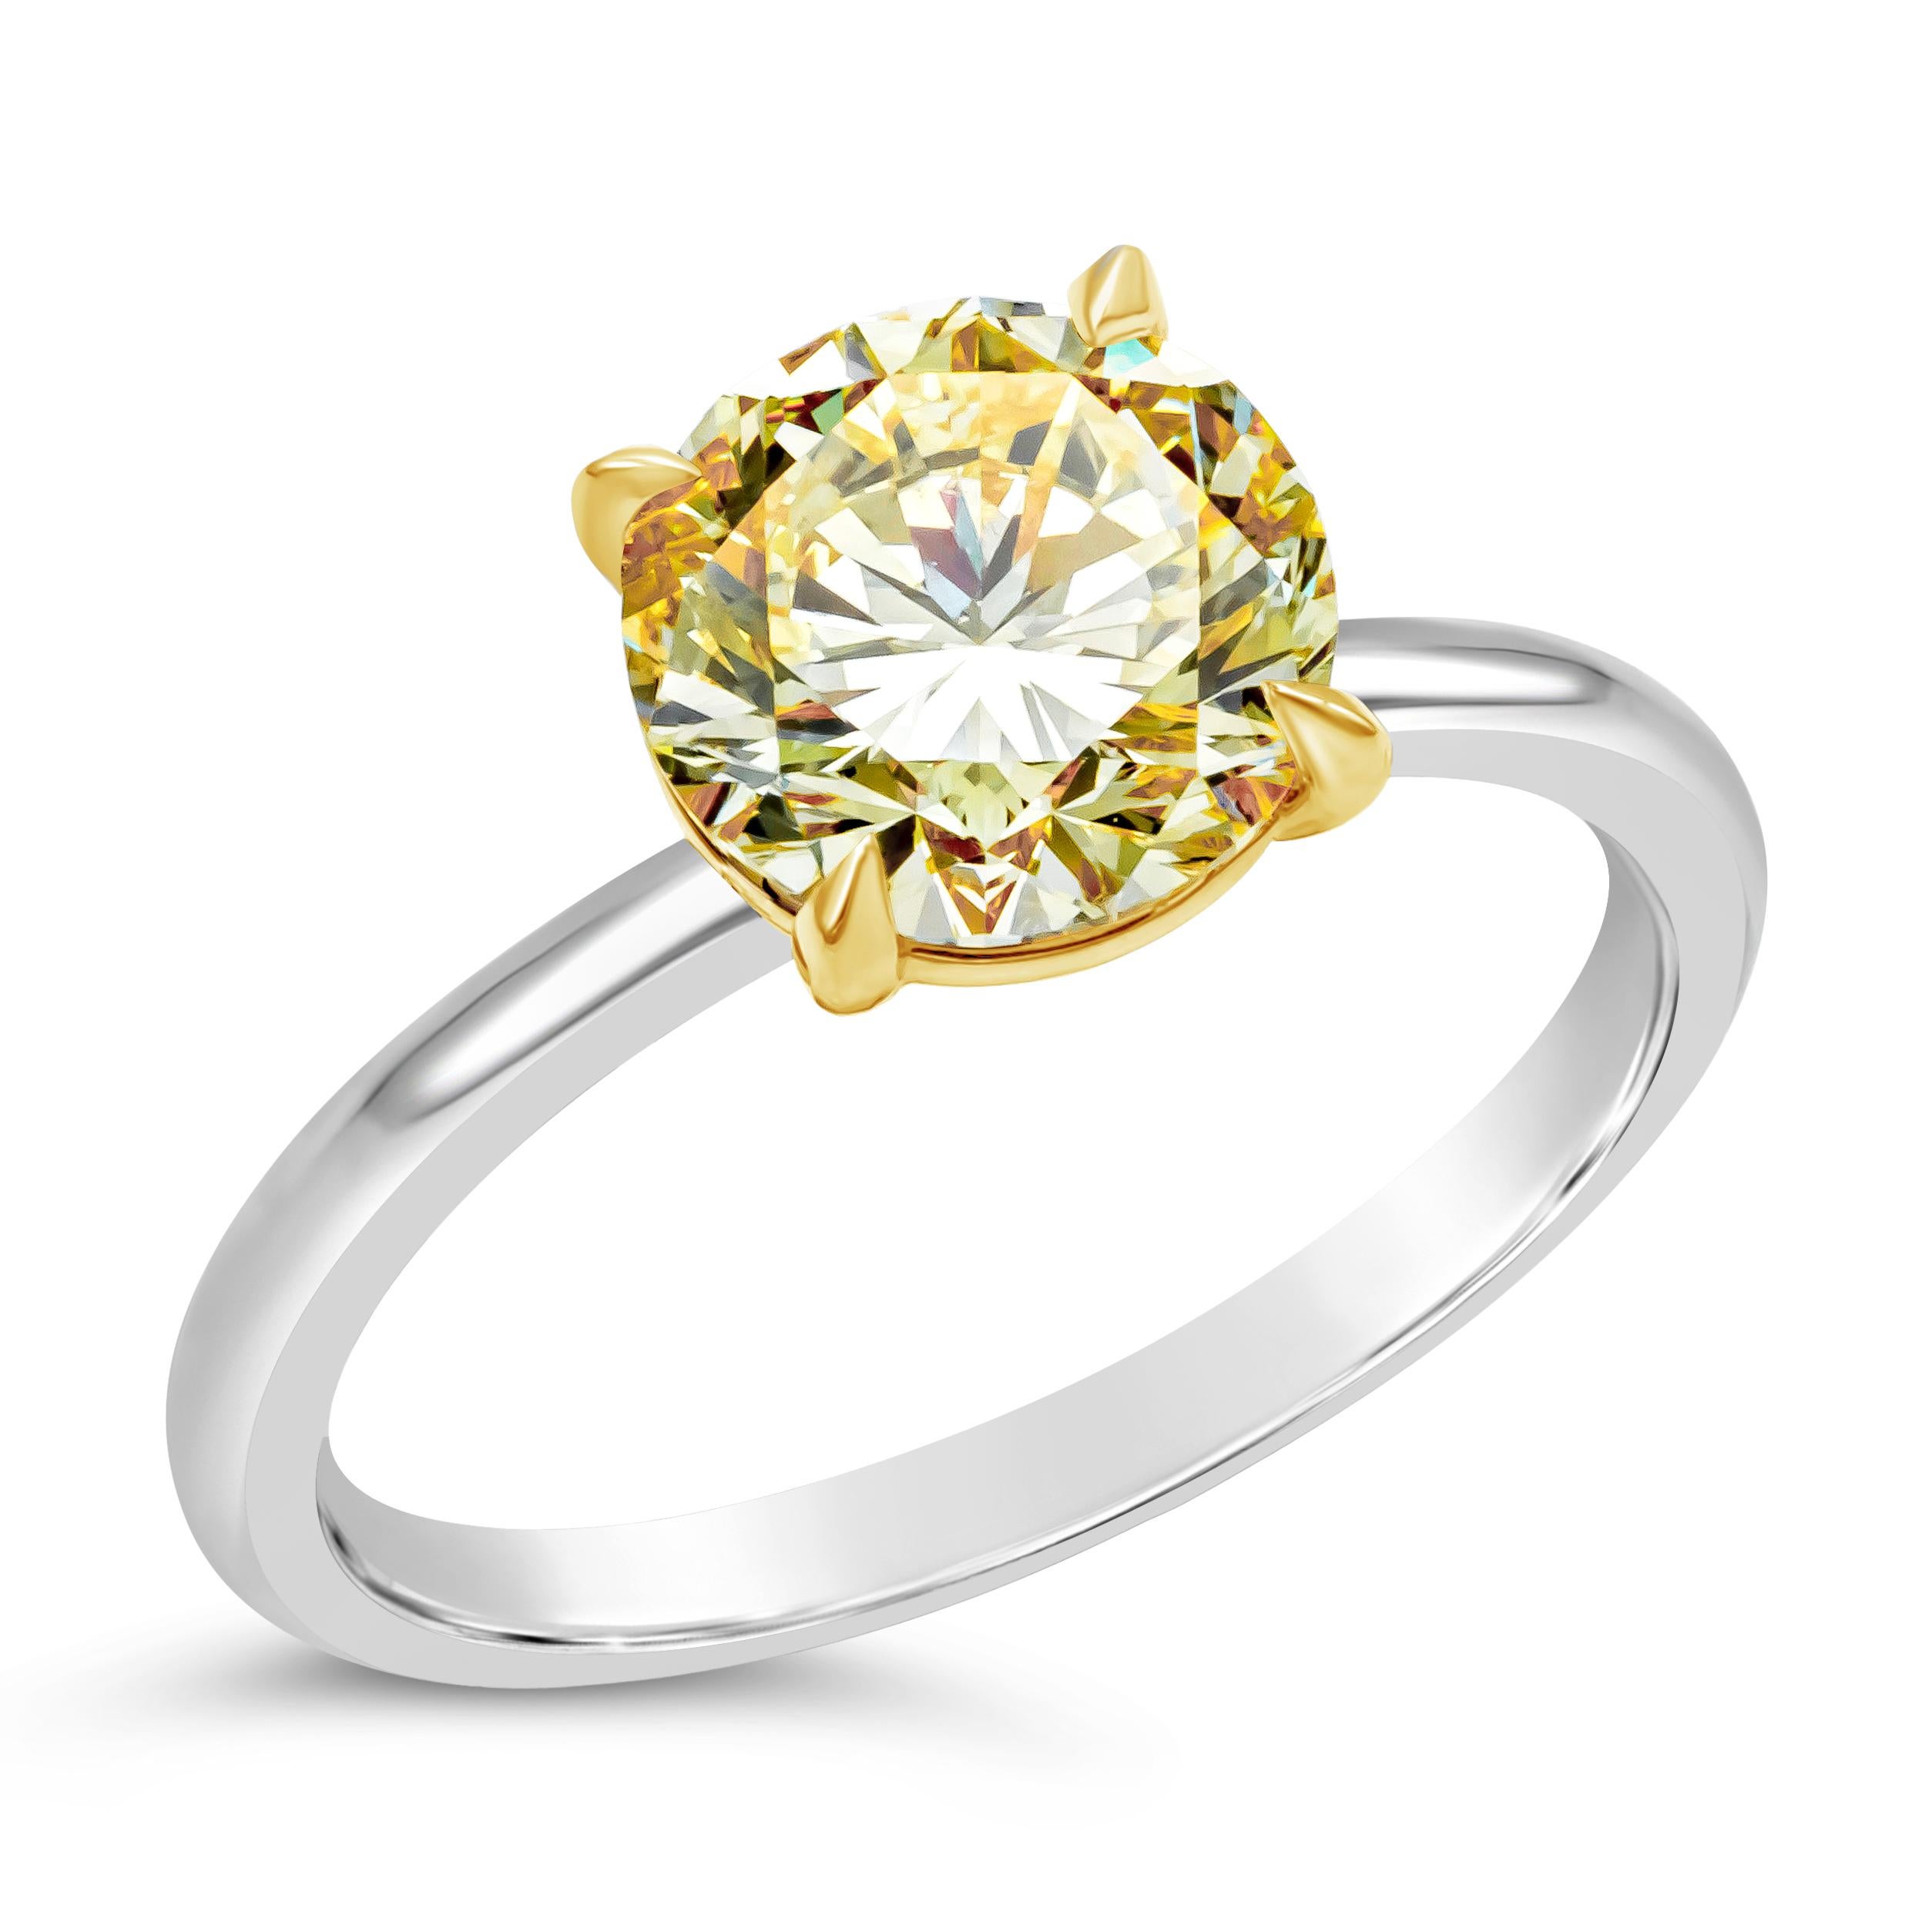 A classic and timeless solitaire diamond ring showcasing a single fancy light yellow round brilliant diamond weighing 2.00 carats. Diamond set in 18 karat yellow gold prongs, mounted on polished platinum ring. Accompanied with a GIA report